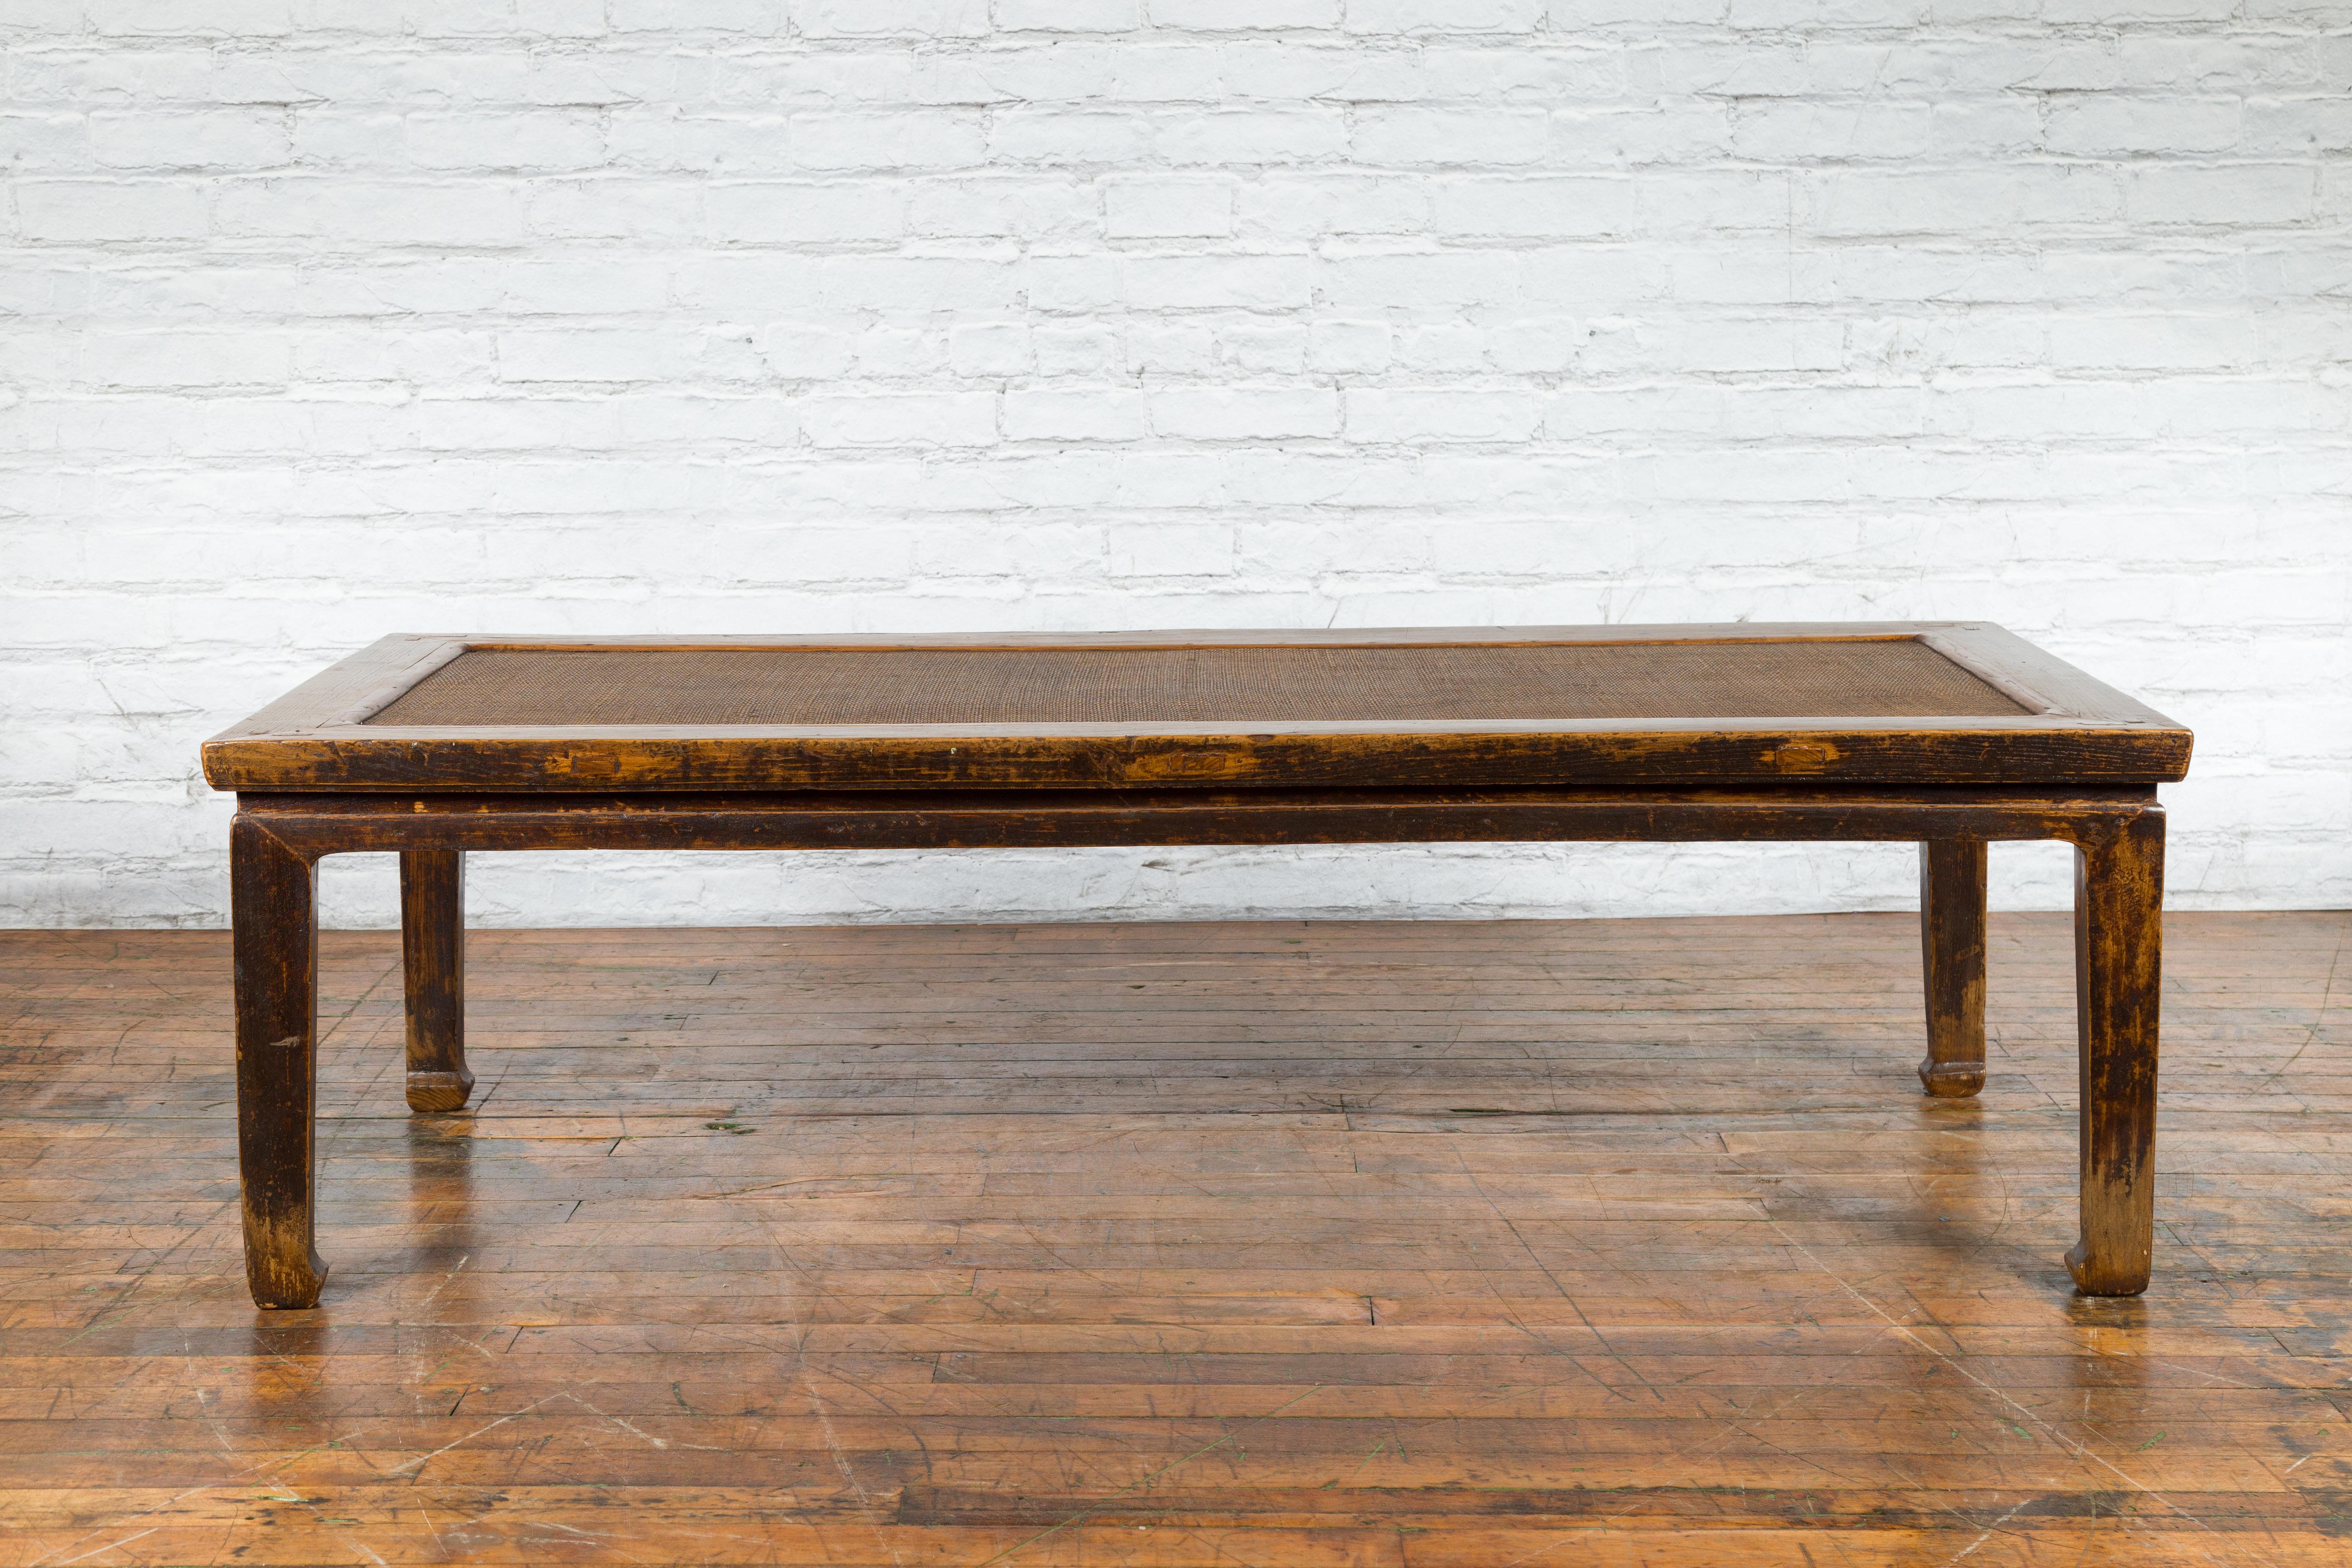 A large Chinese Qing Dynasty period elmwood coffee table from the 19th century, with rattan top and straight horse hoof legs. Created in China during the Qing Dynasty in the 19th century, this large elmwood coffee table features a rectangular top